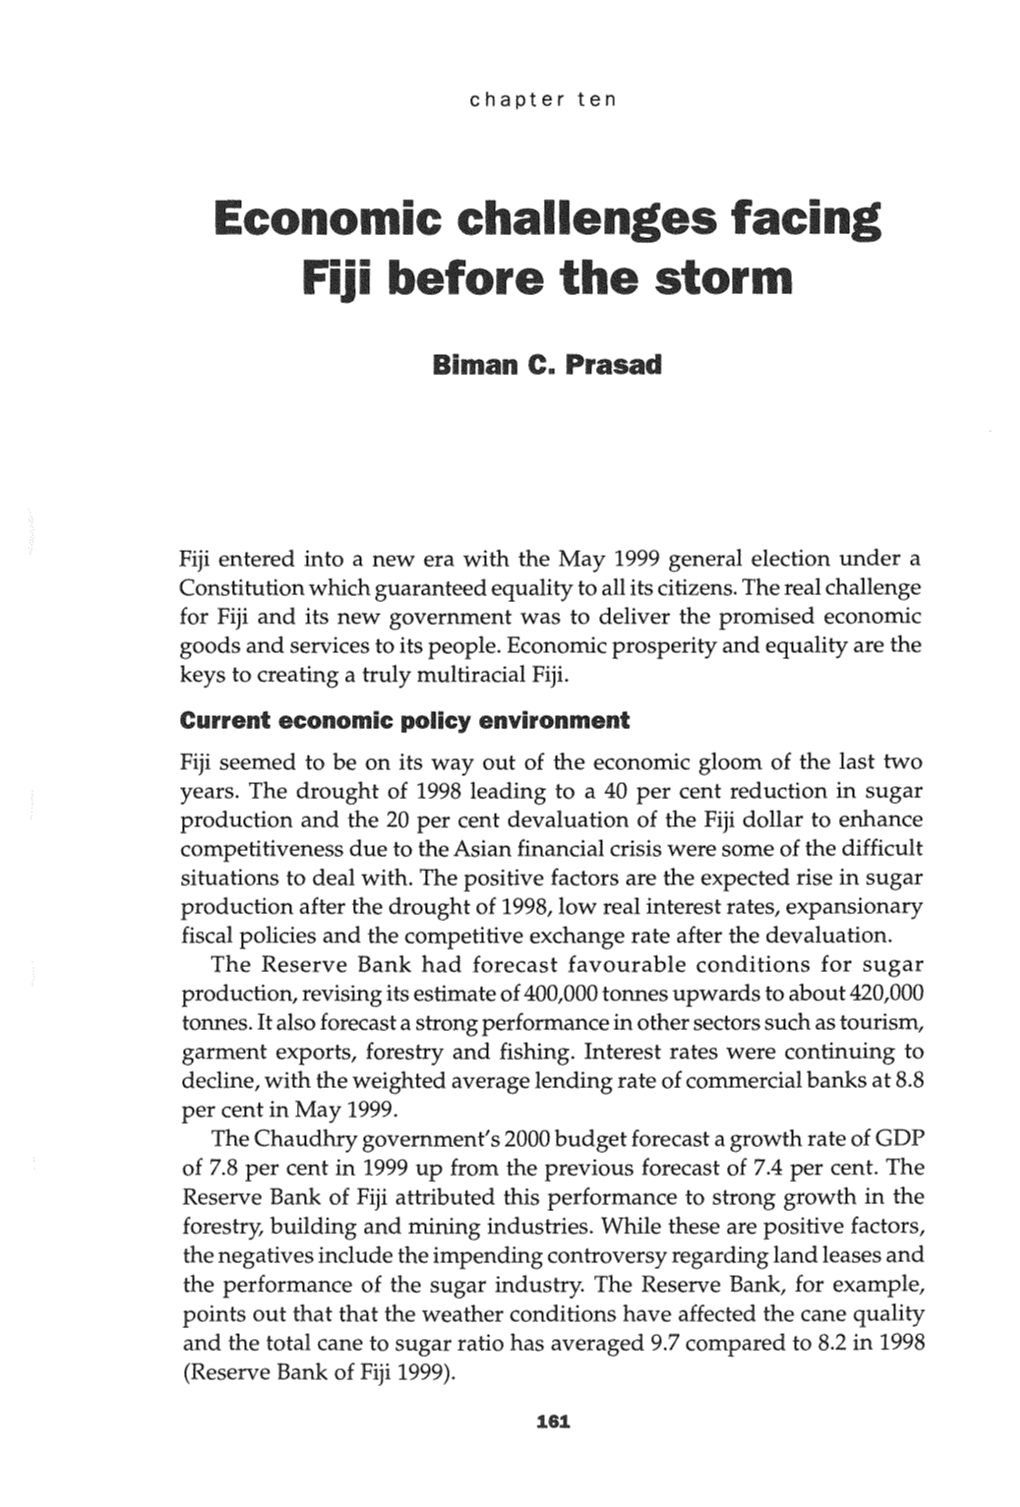 Economic Challenges Facing Fiji Before the Storm 163